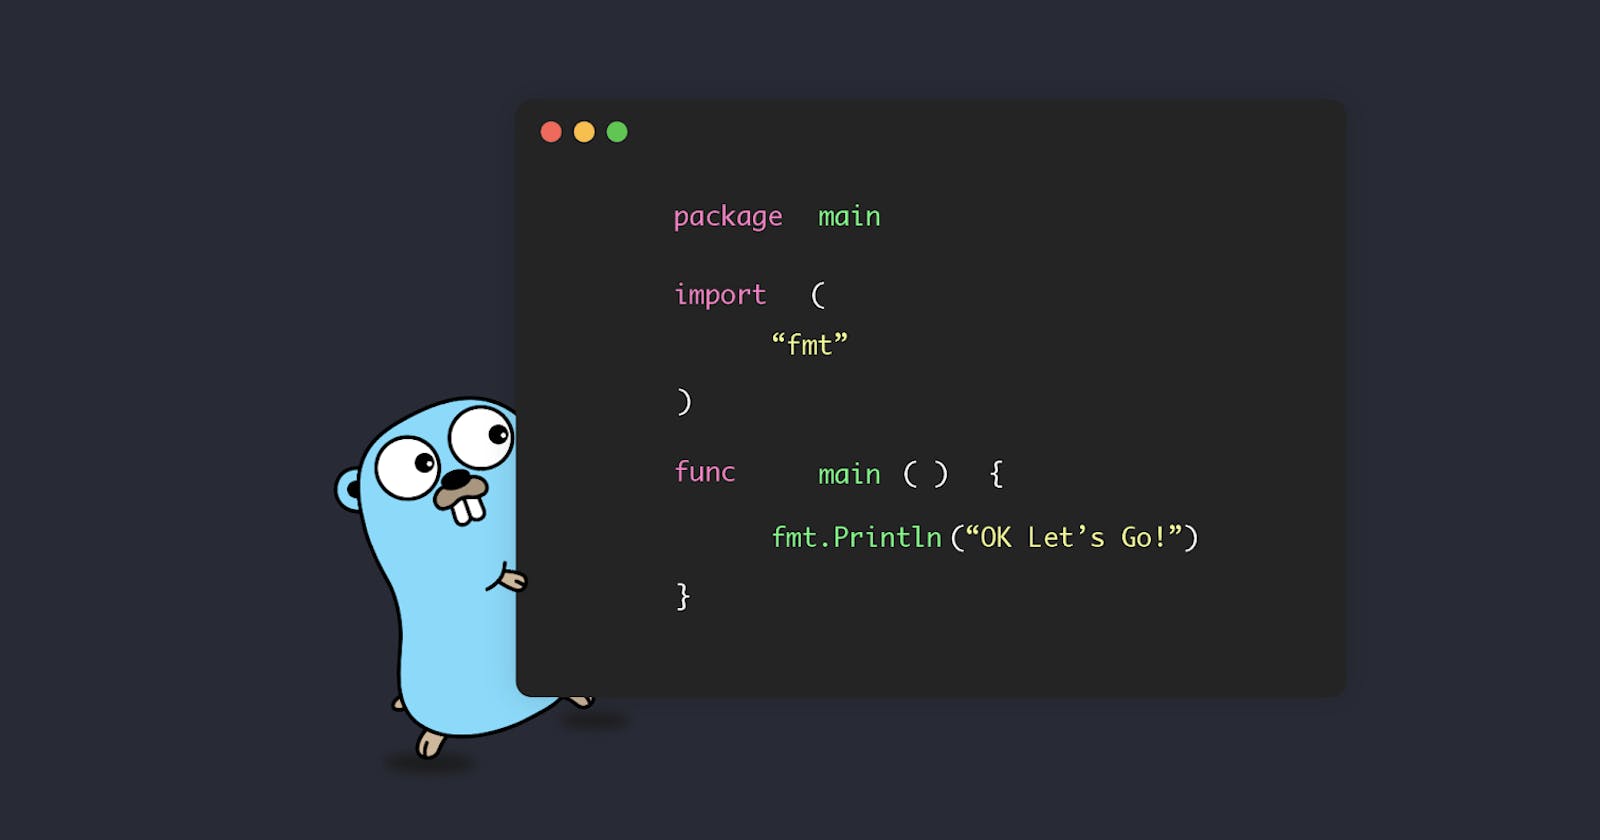 How to create a package in golang.